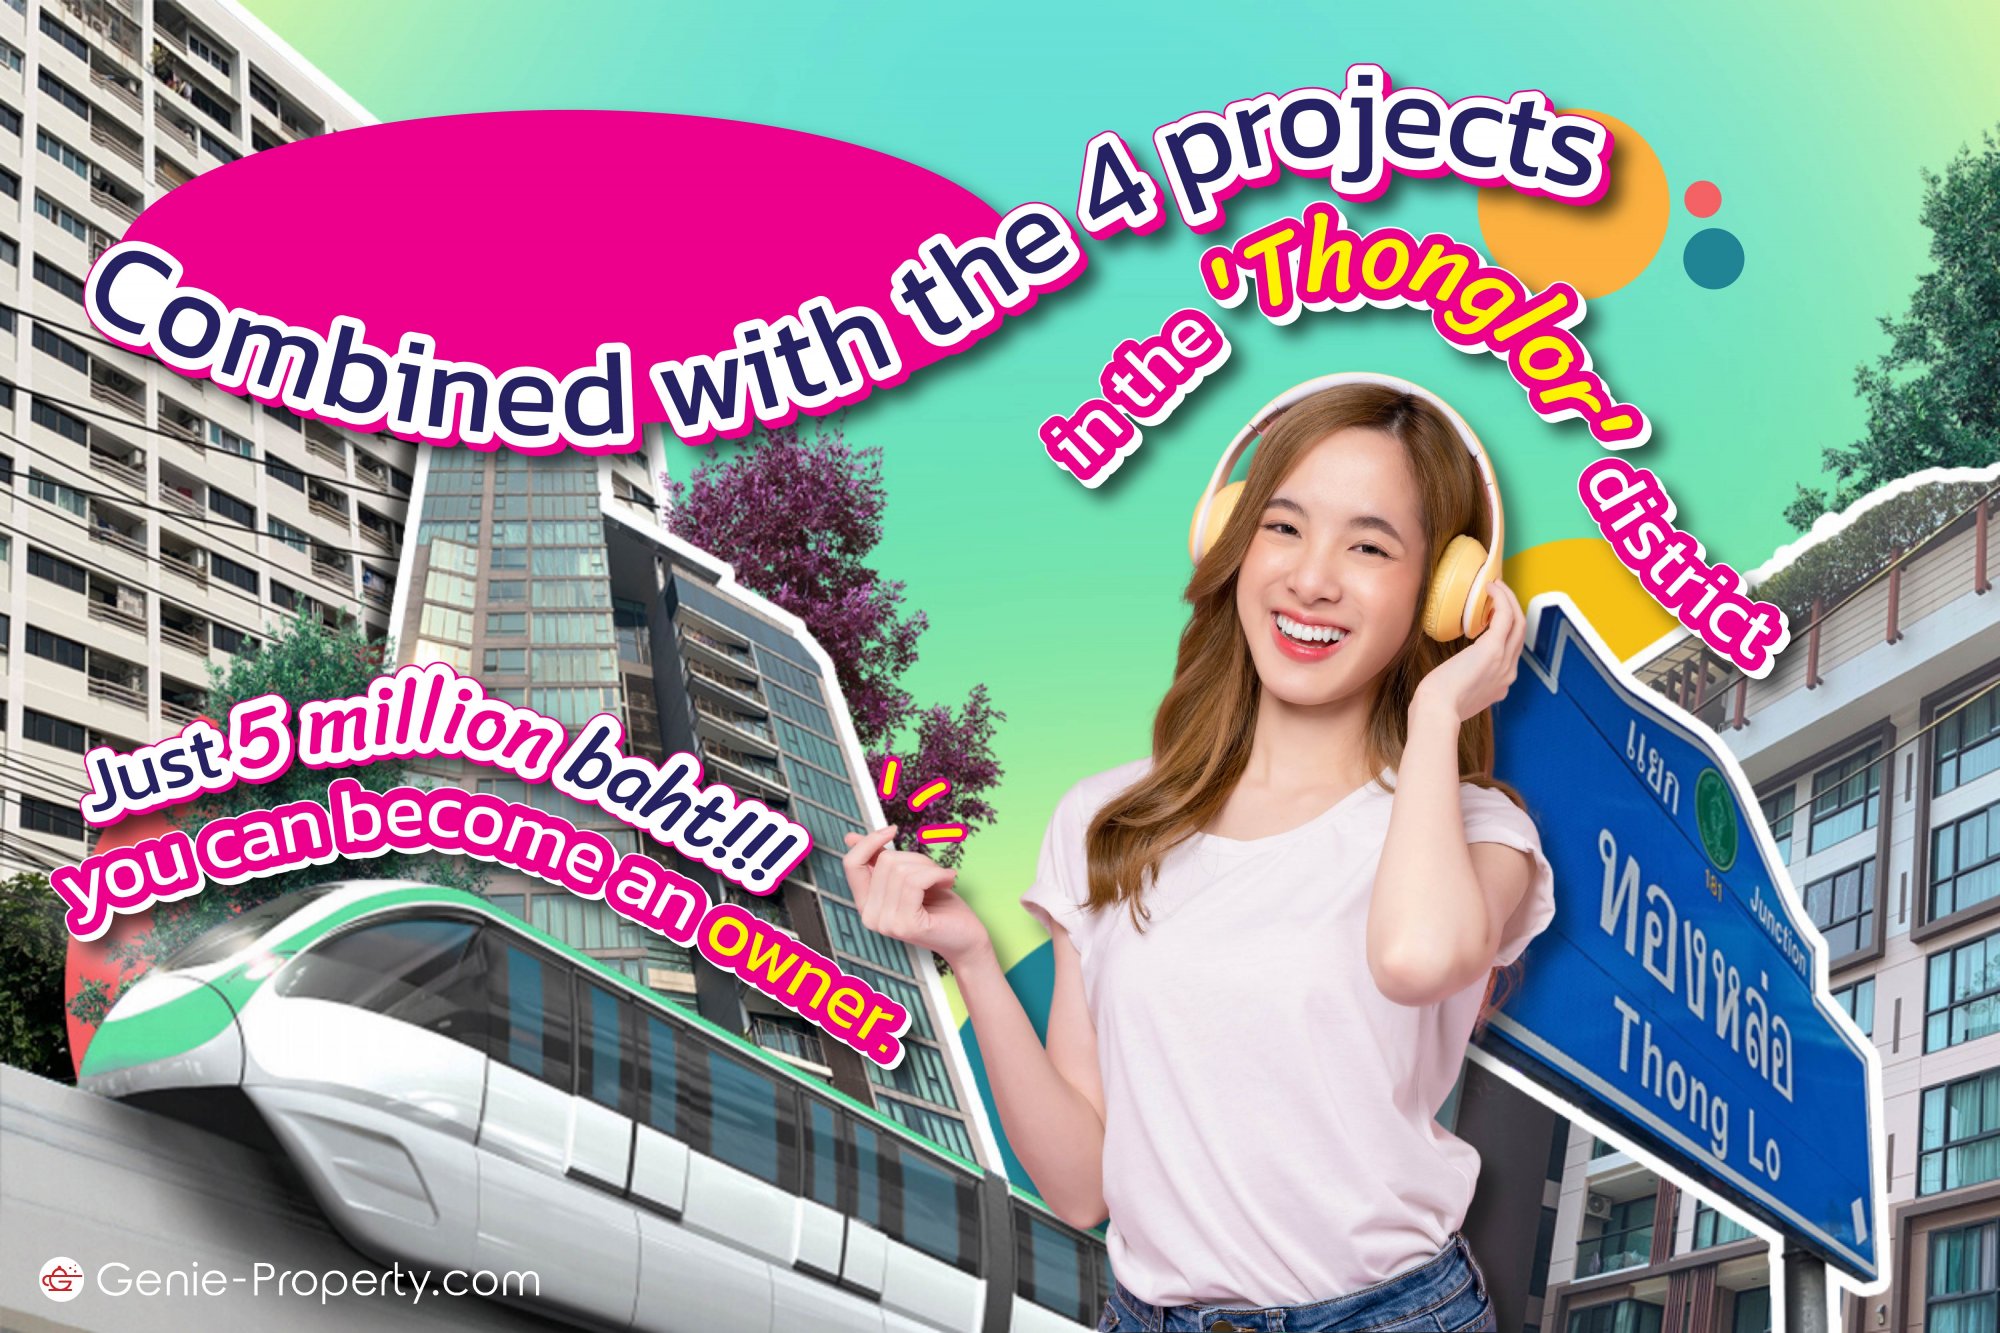 image for Combined with the 4 projects in the 'Thong Lo' district, you can become an owner with just 5 million baht!!!